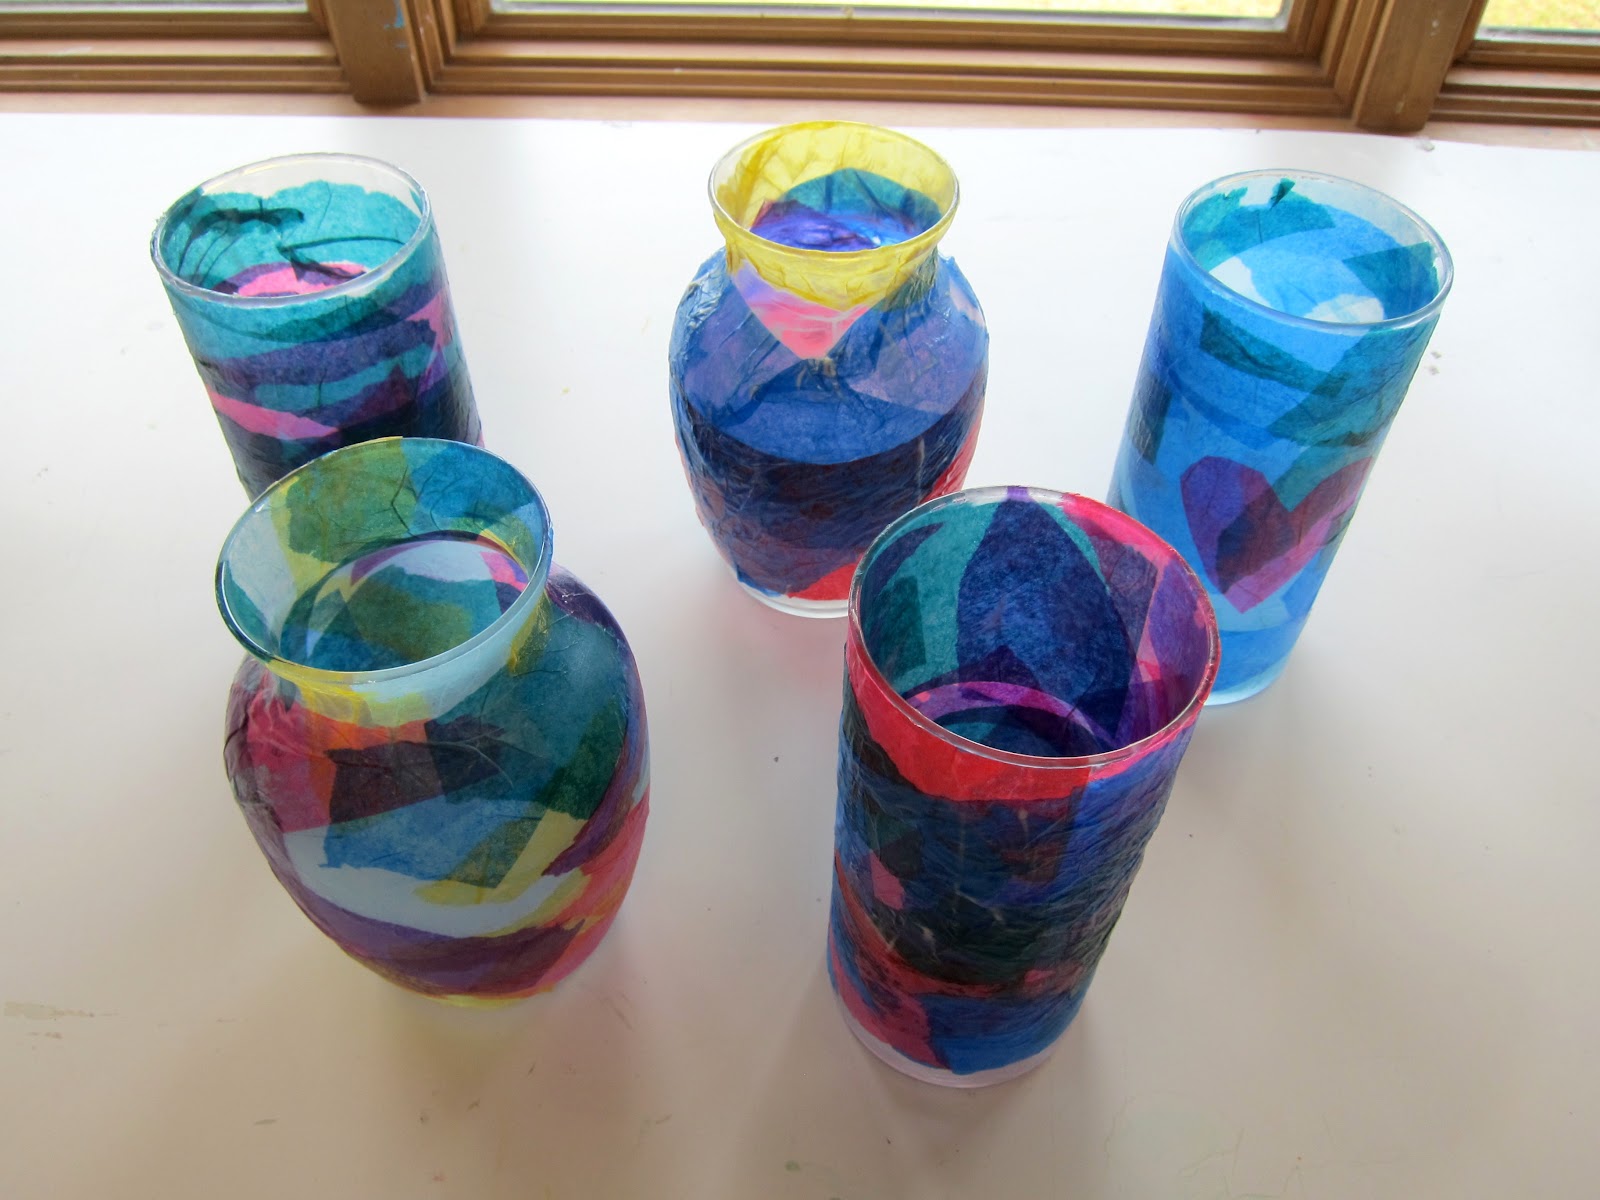 Several glass vases with multi-colored tissue paper decoupaged on so as to produce a stained-glass effect.